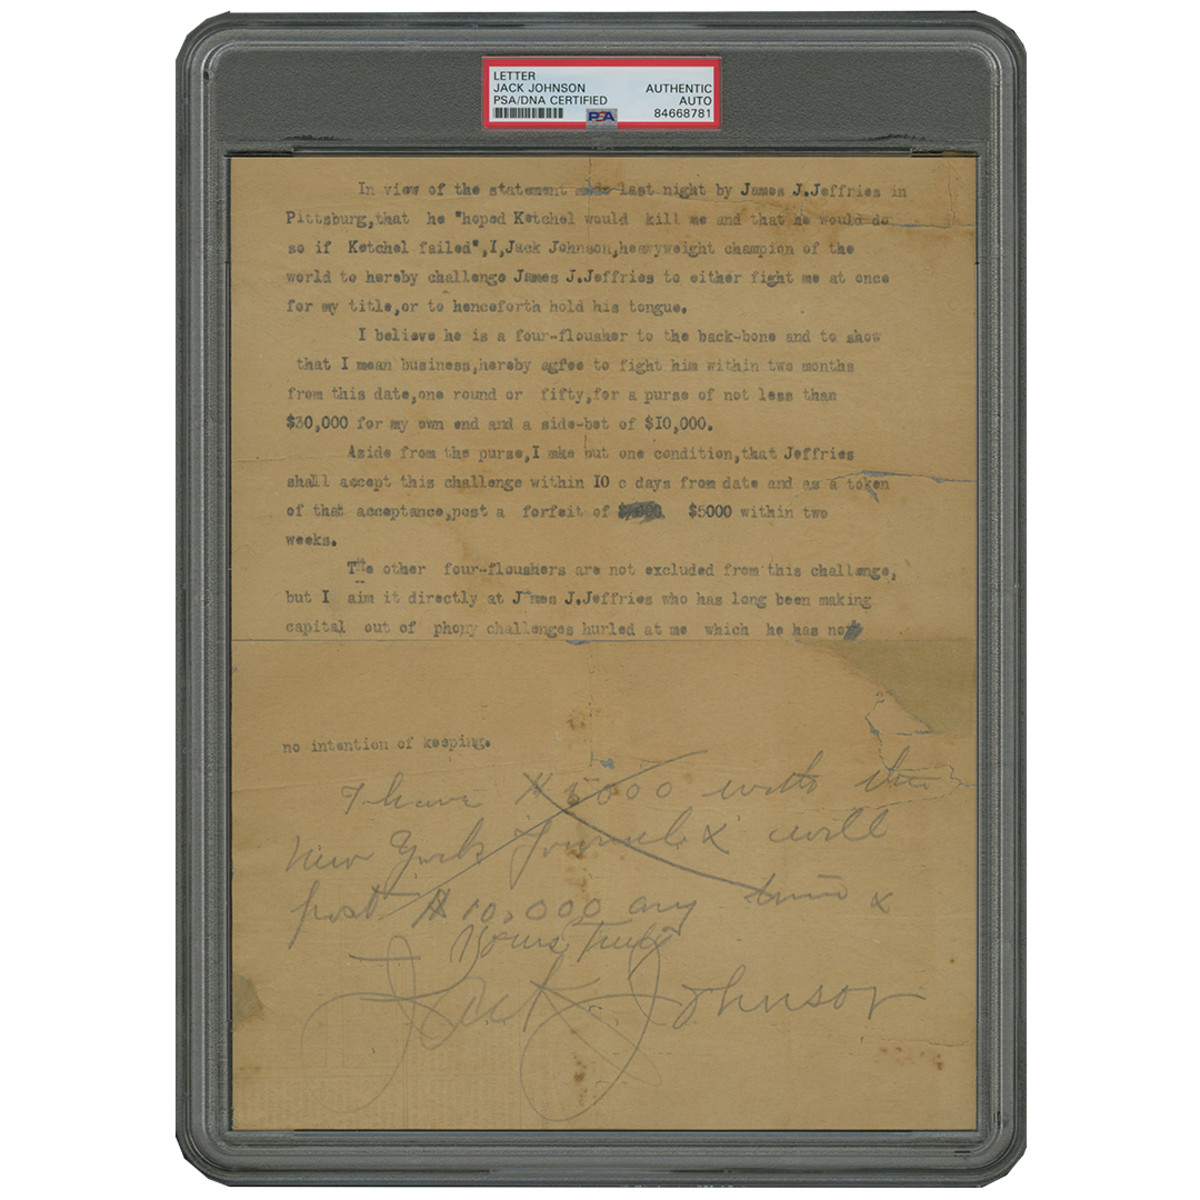 A historic 1910 letter from Jack Johnson challenging James Jeffries to the 1910 World Heavyweight Championship.